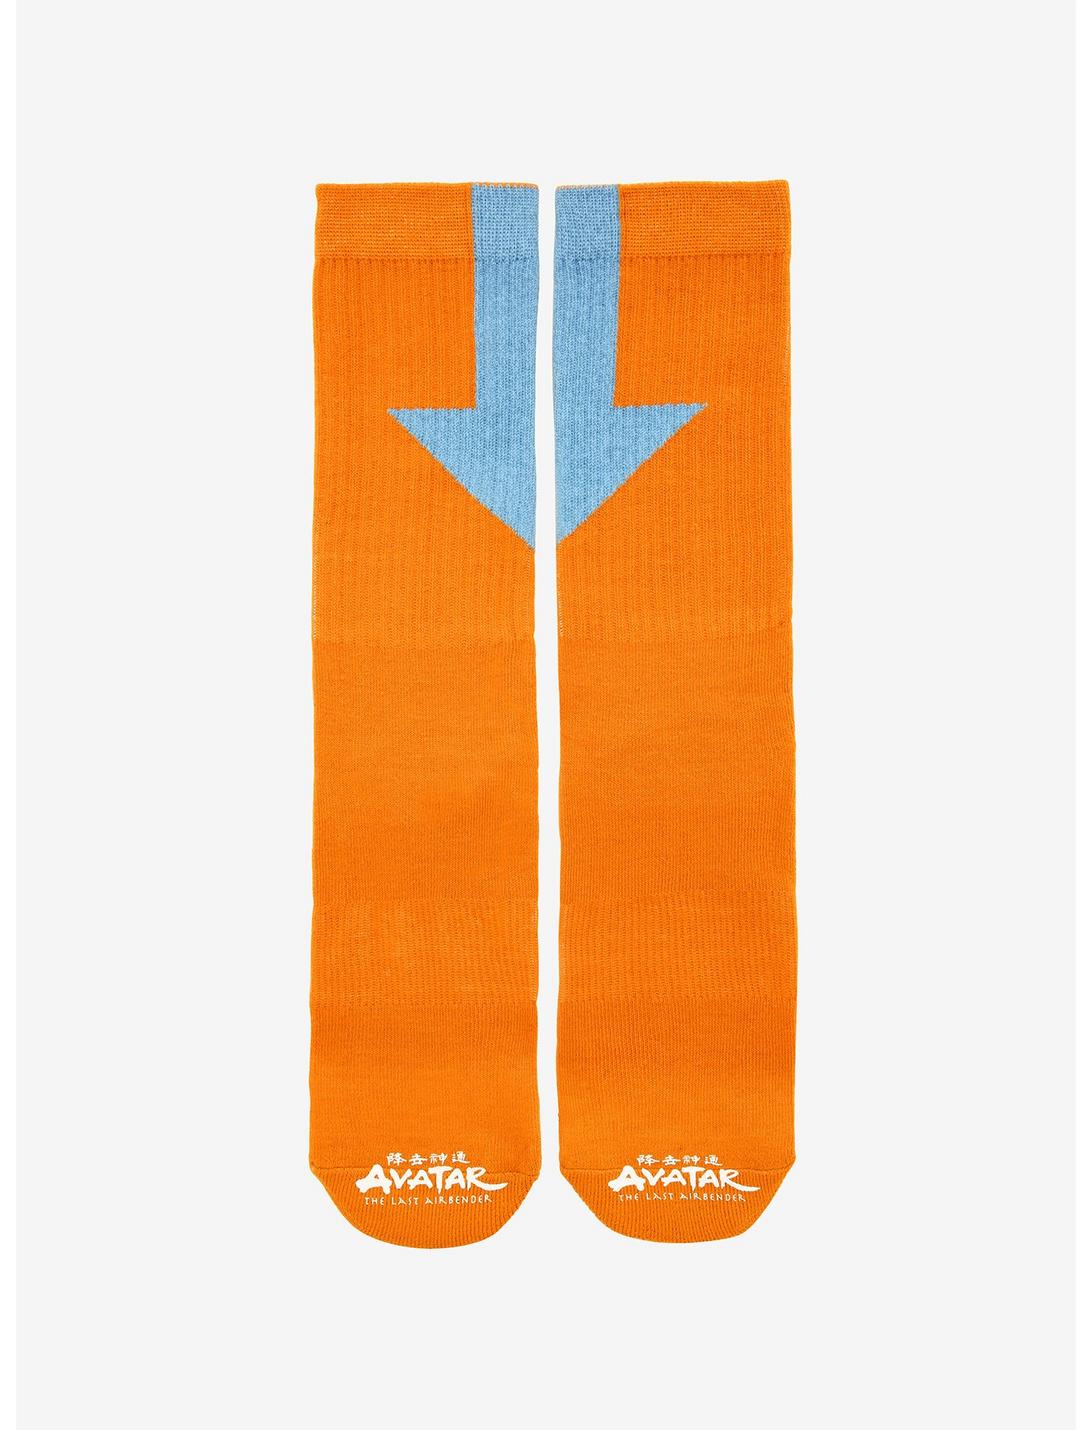 Avatar: The Last Airbender Arrow Crew Socks - BoxLunch Exclusive, , hi-res